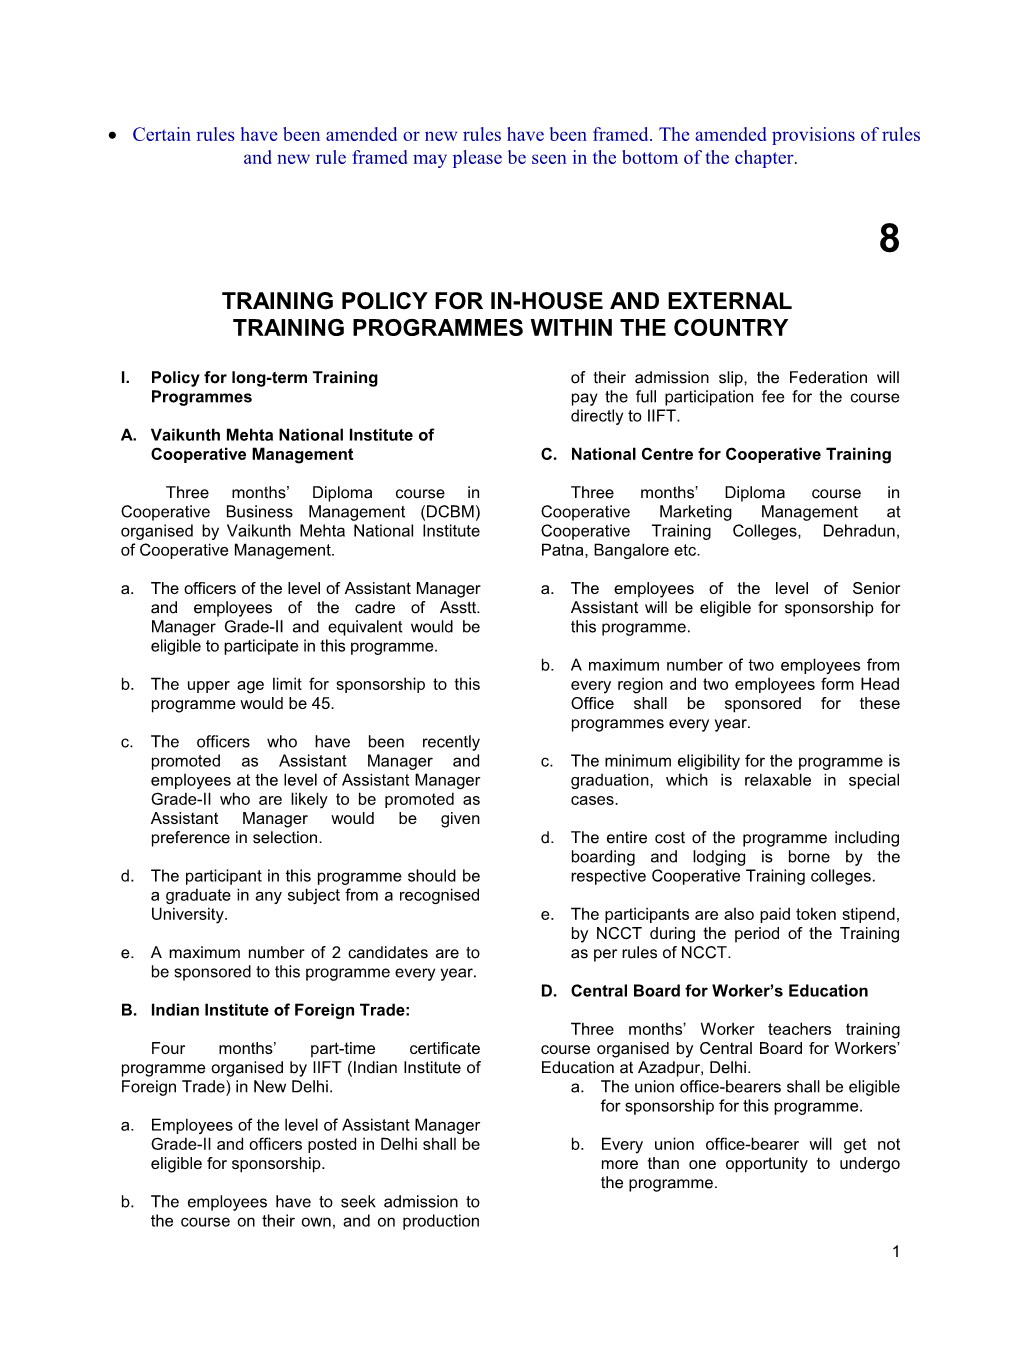 Training Policy for In-House and External Training Programmes Within the Country